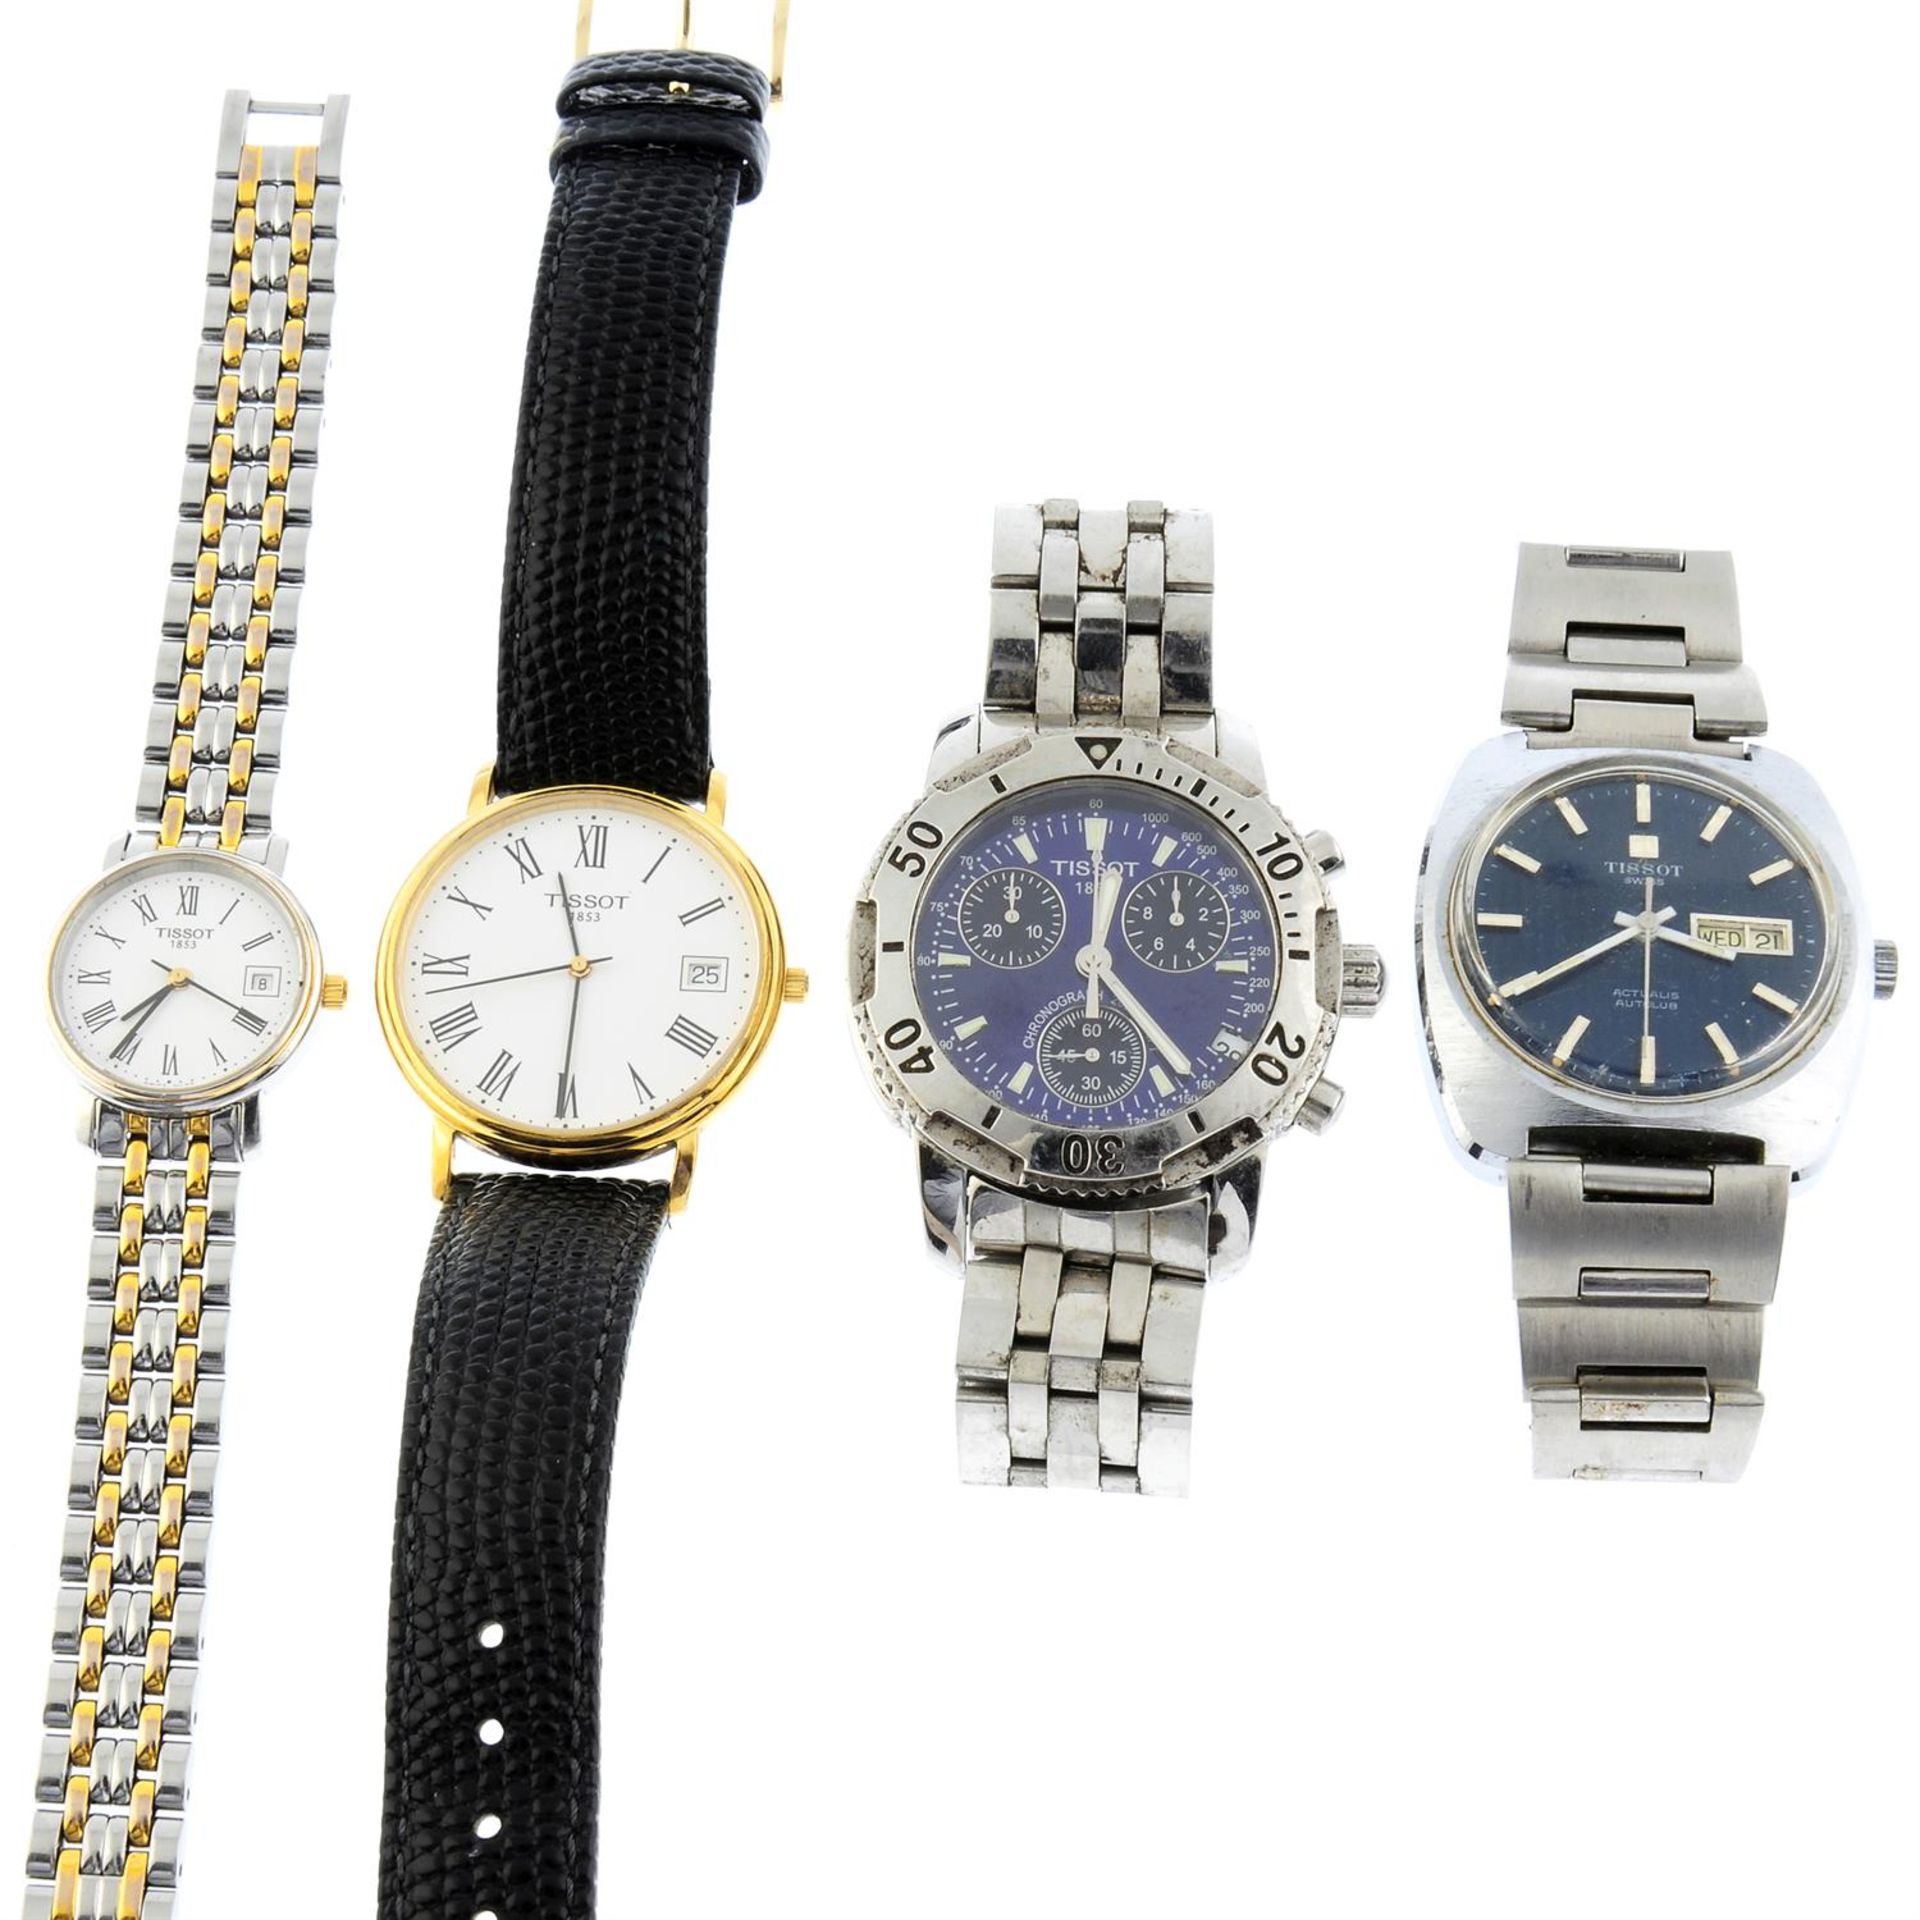 A group of four assorted Tissot watches, to include a PRS200 chronograph example.